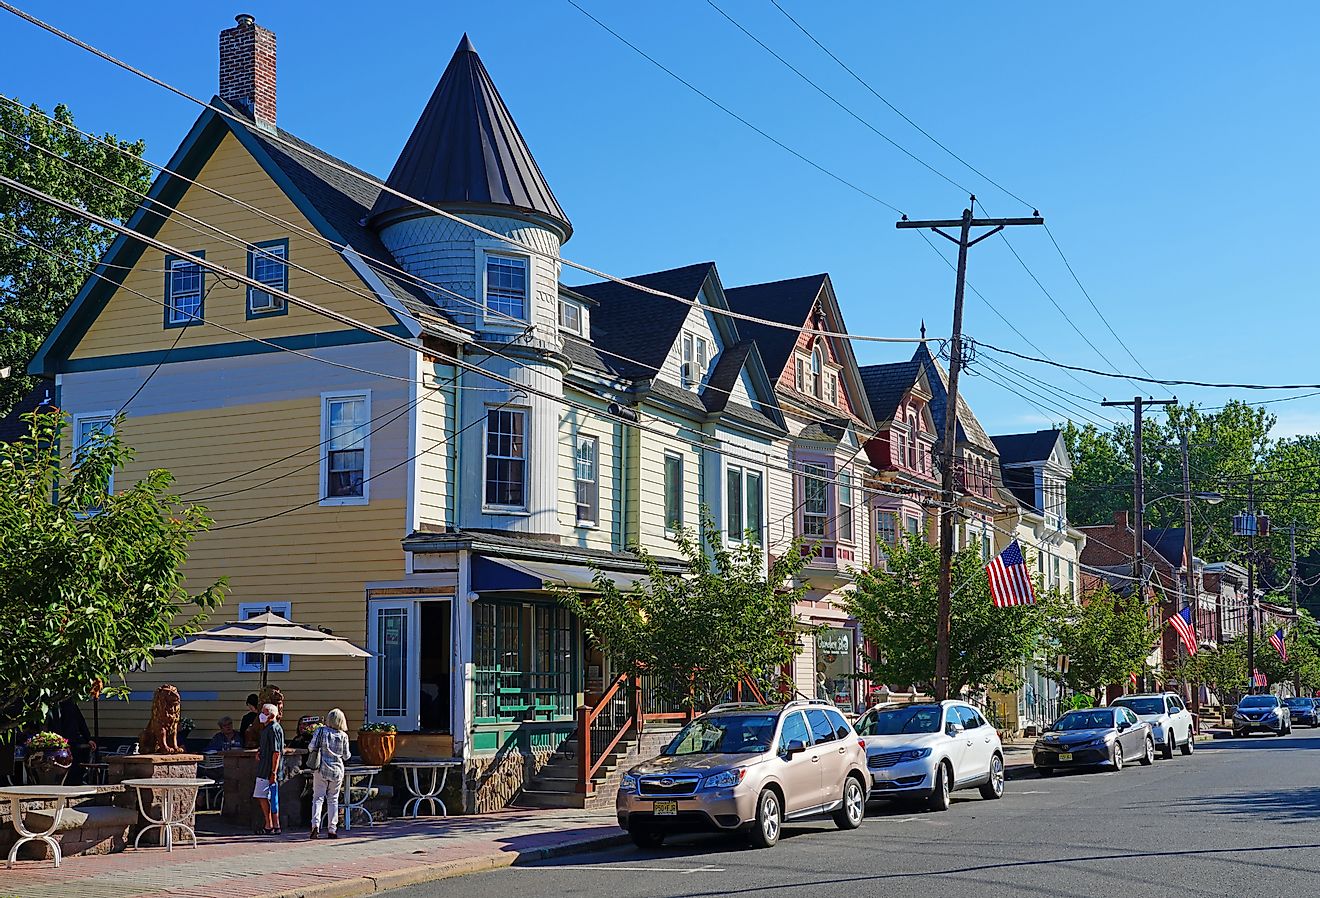 Historic buildings in downtown Clinton, New Jersey. Image credit EQRoy via Shutterstock